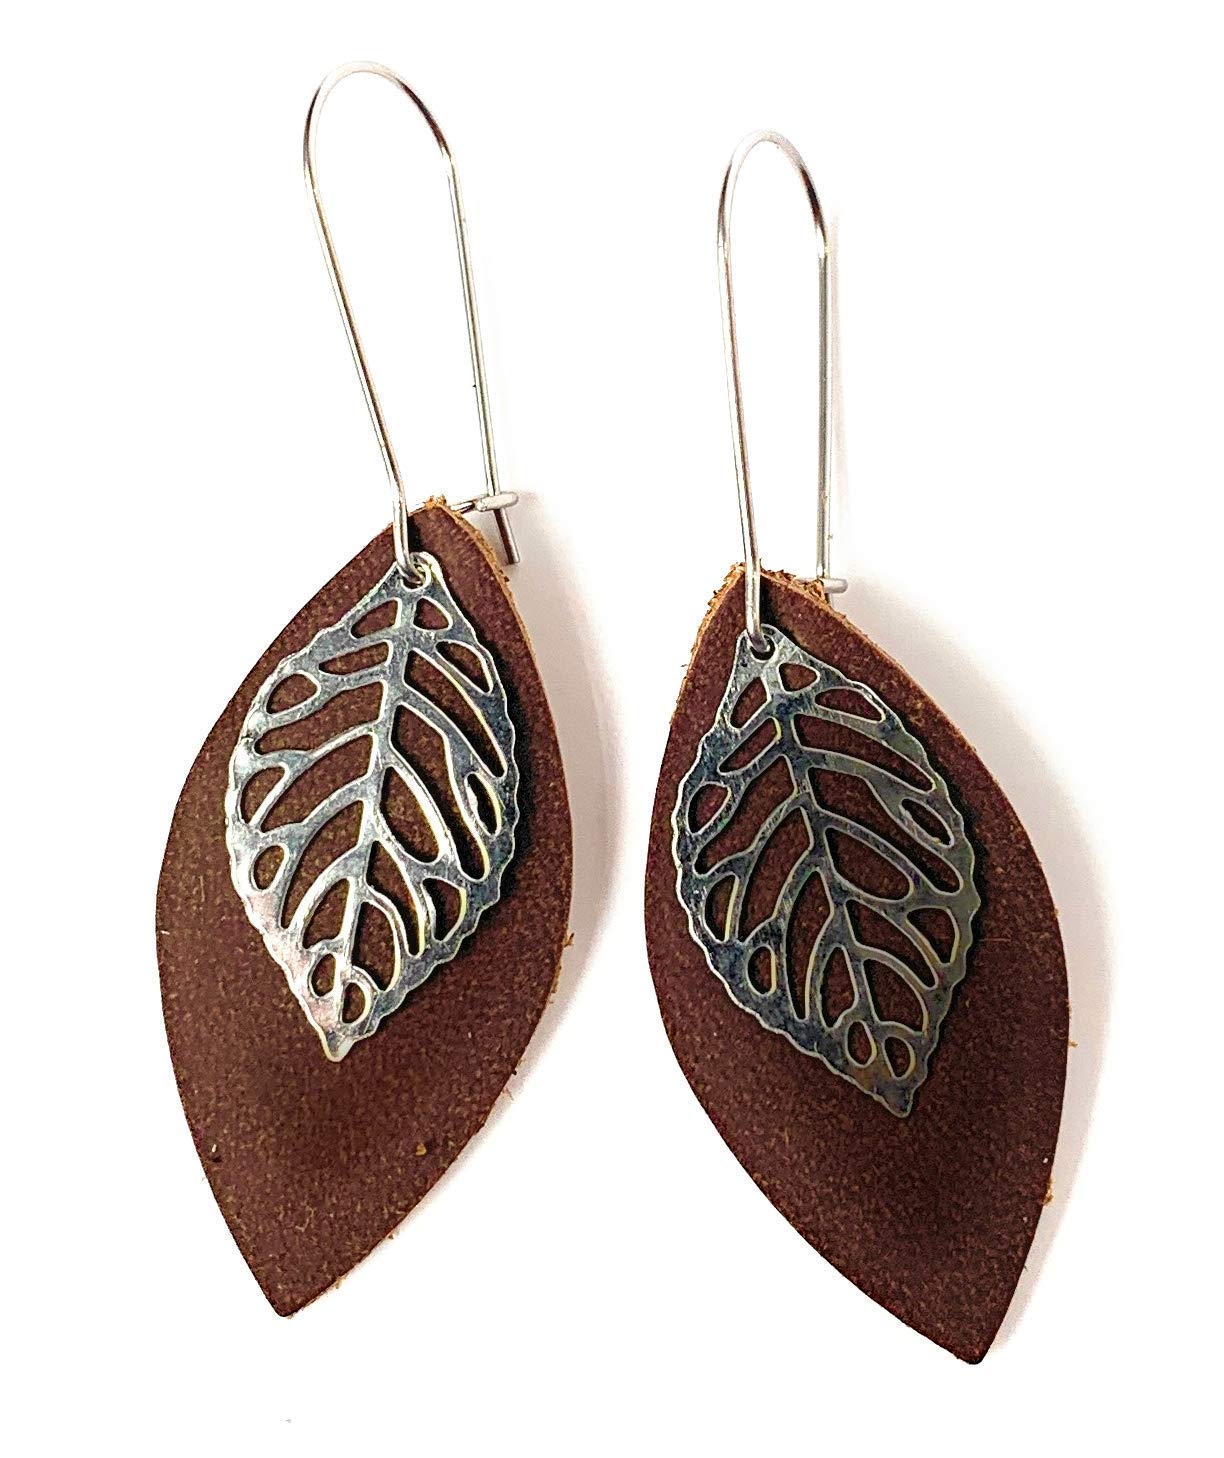 Book Cover Leather Leaf Earrings Rustic Brown Leather Petal with Metal Leaf Charm Small Lightweight Bohemian Dangles